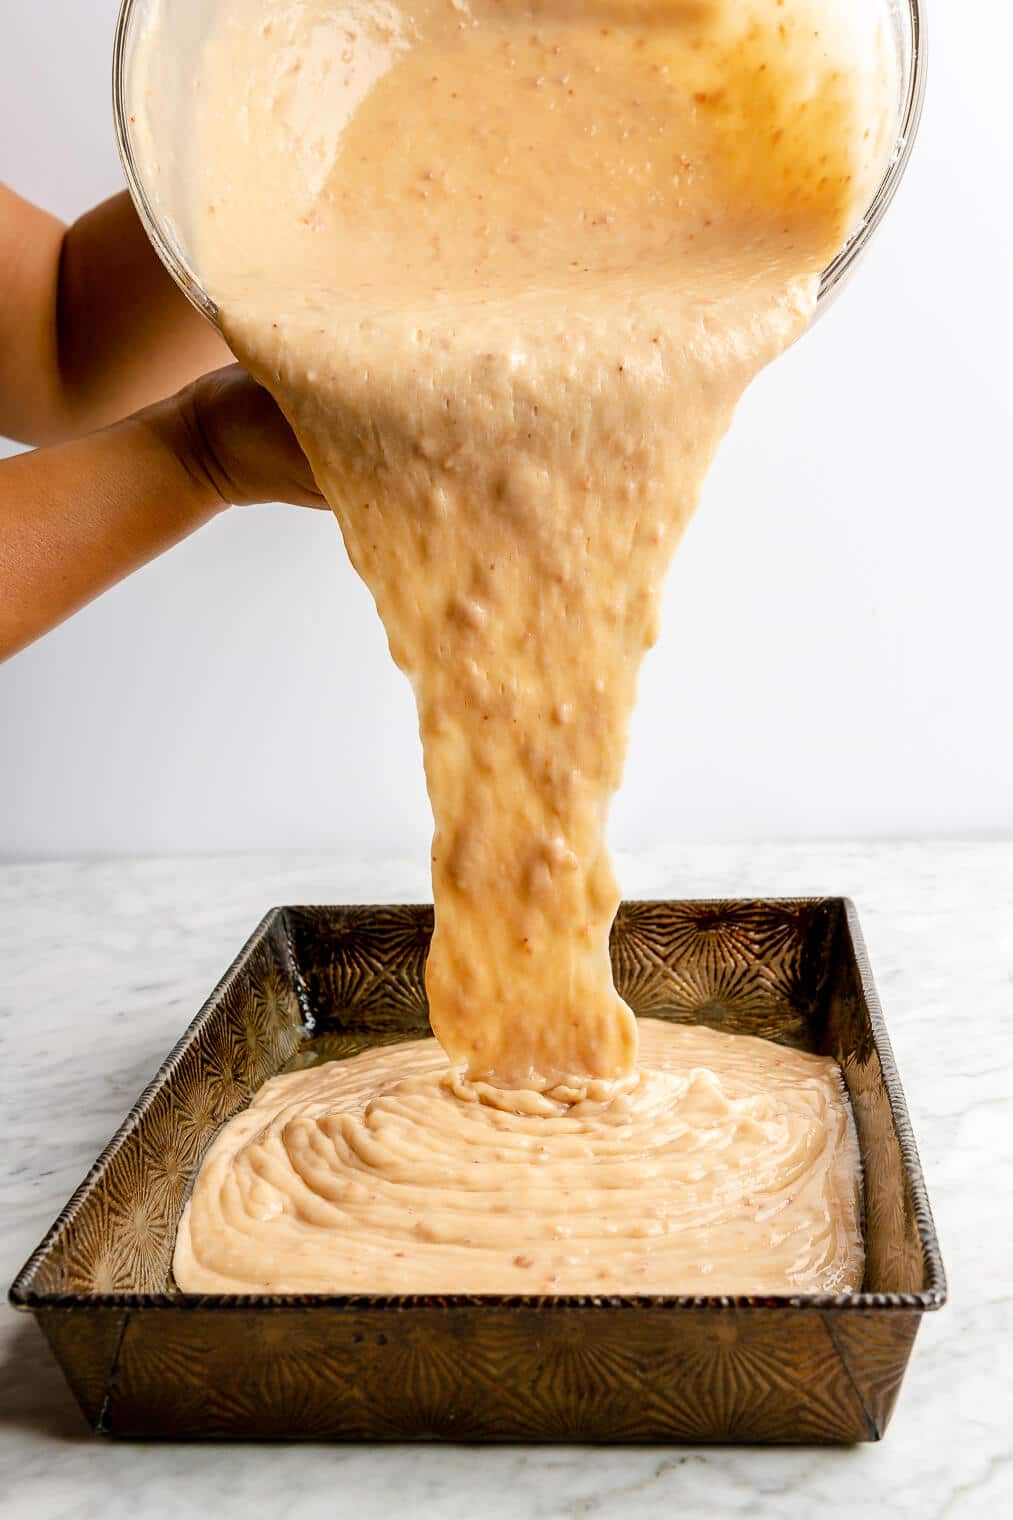 Strawberry cake batter being poured into a cake pan.